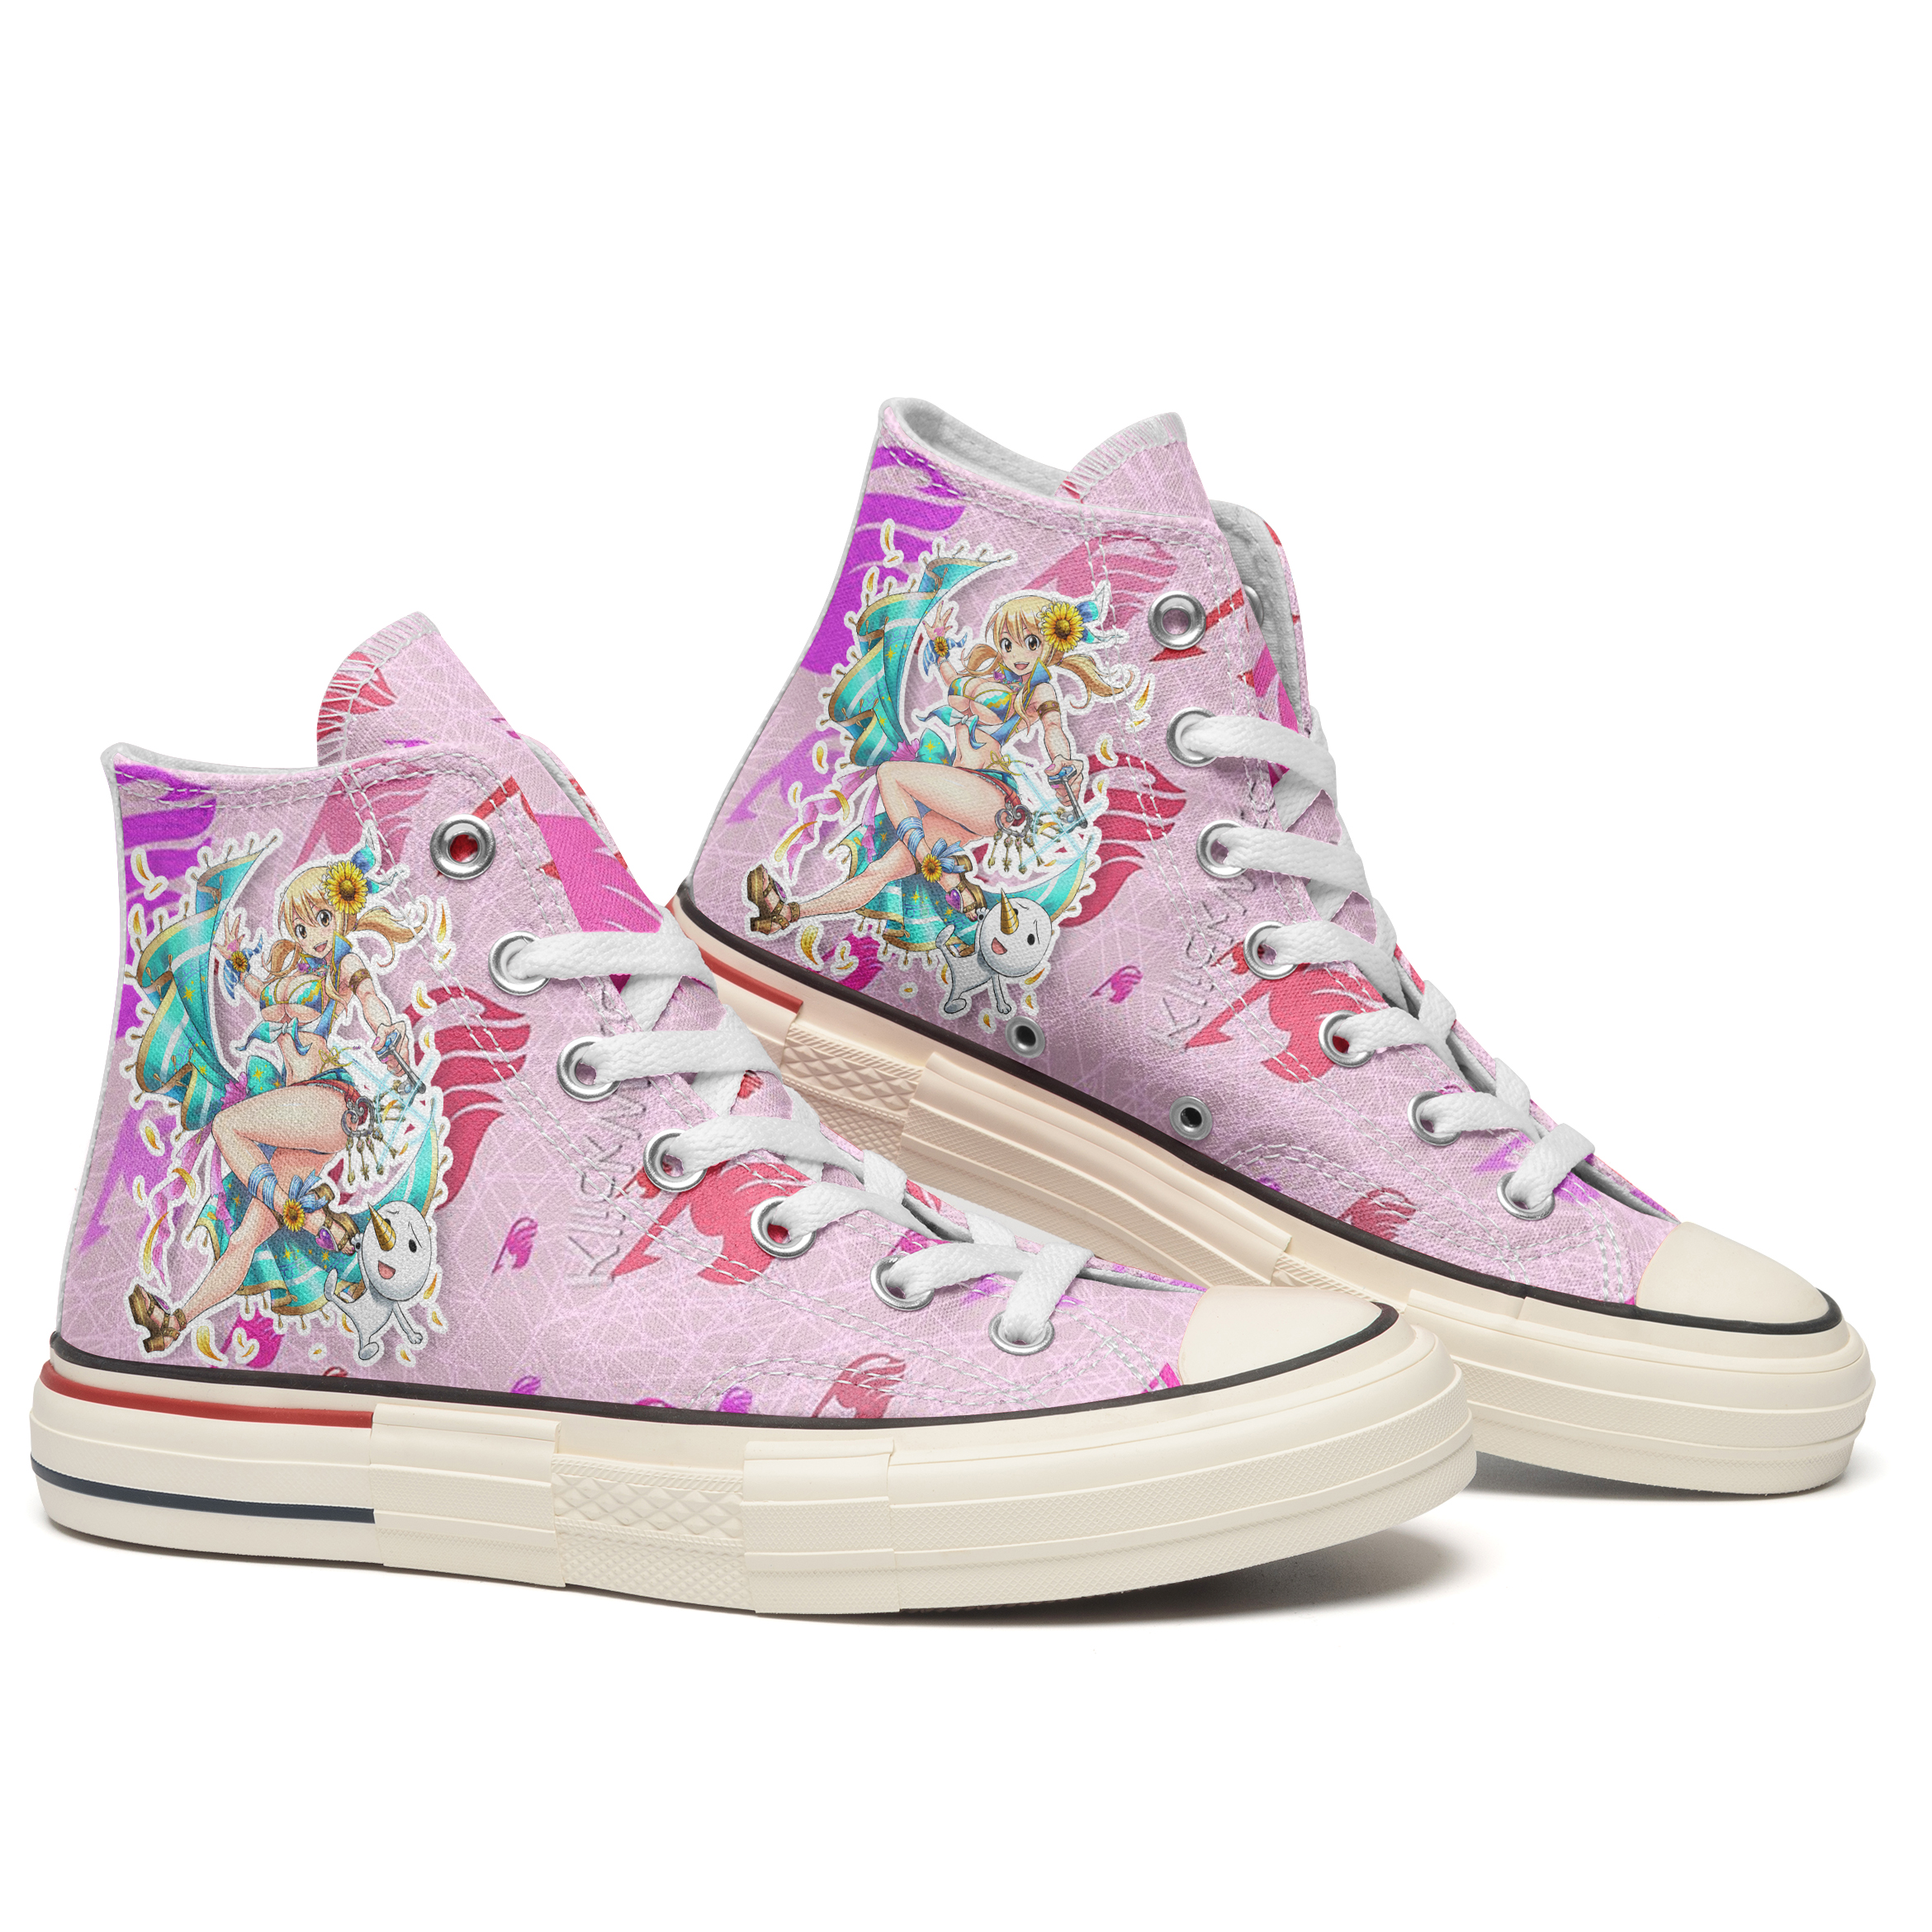 Fairy Tail High Top Canvas Shoes Special Edition